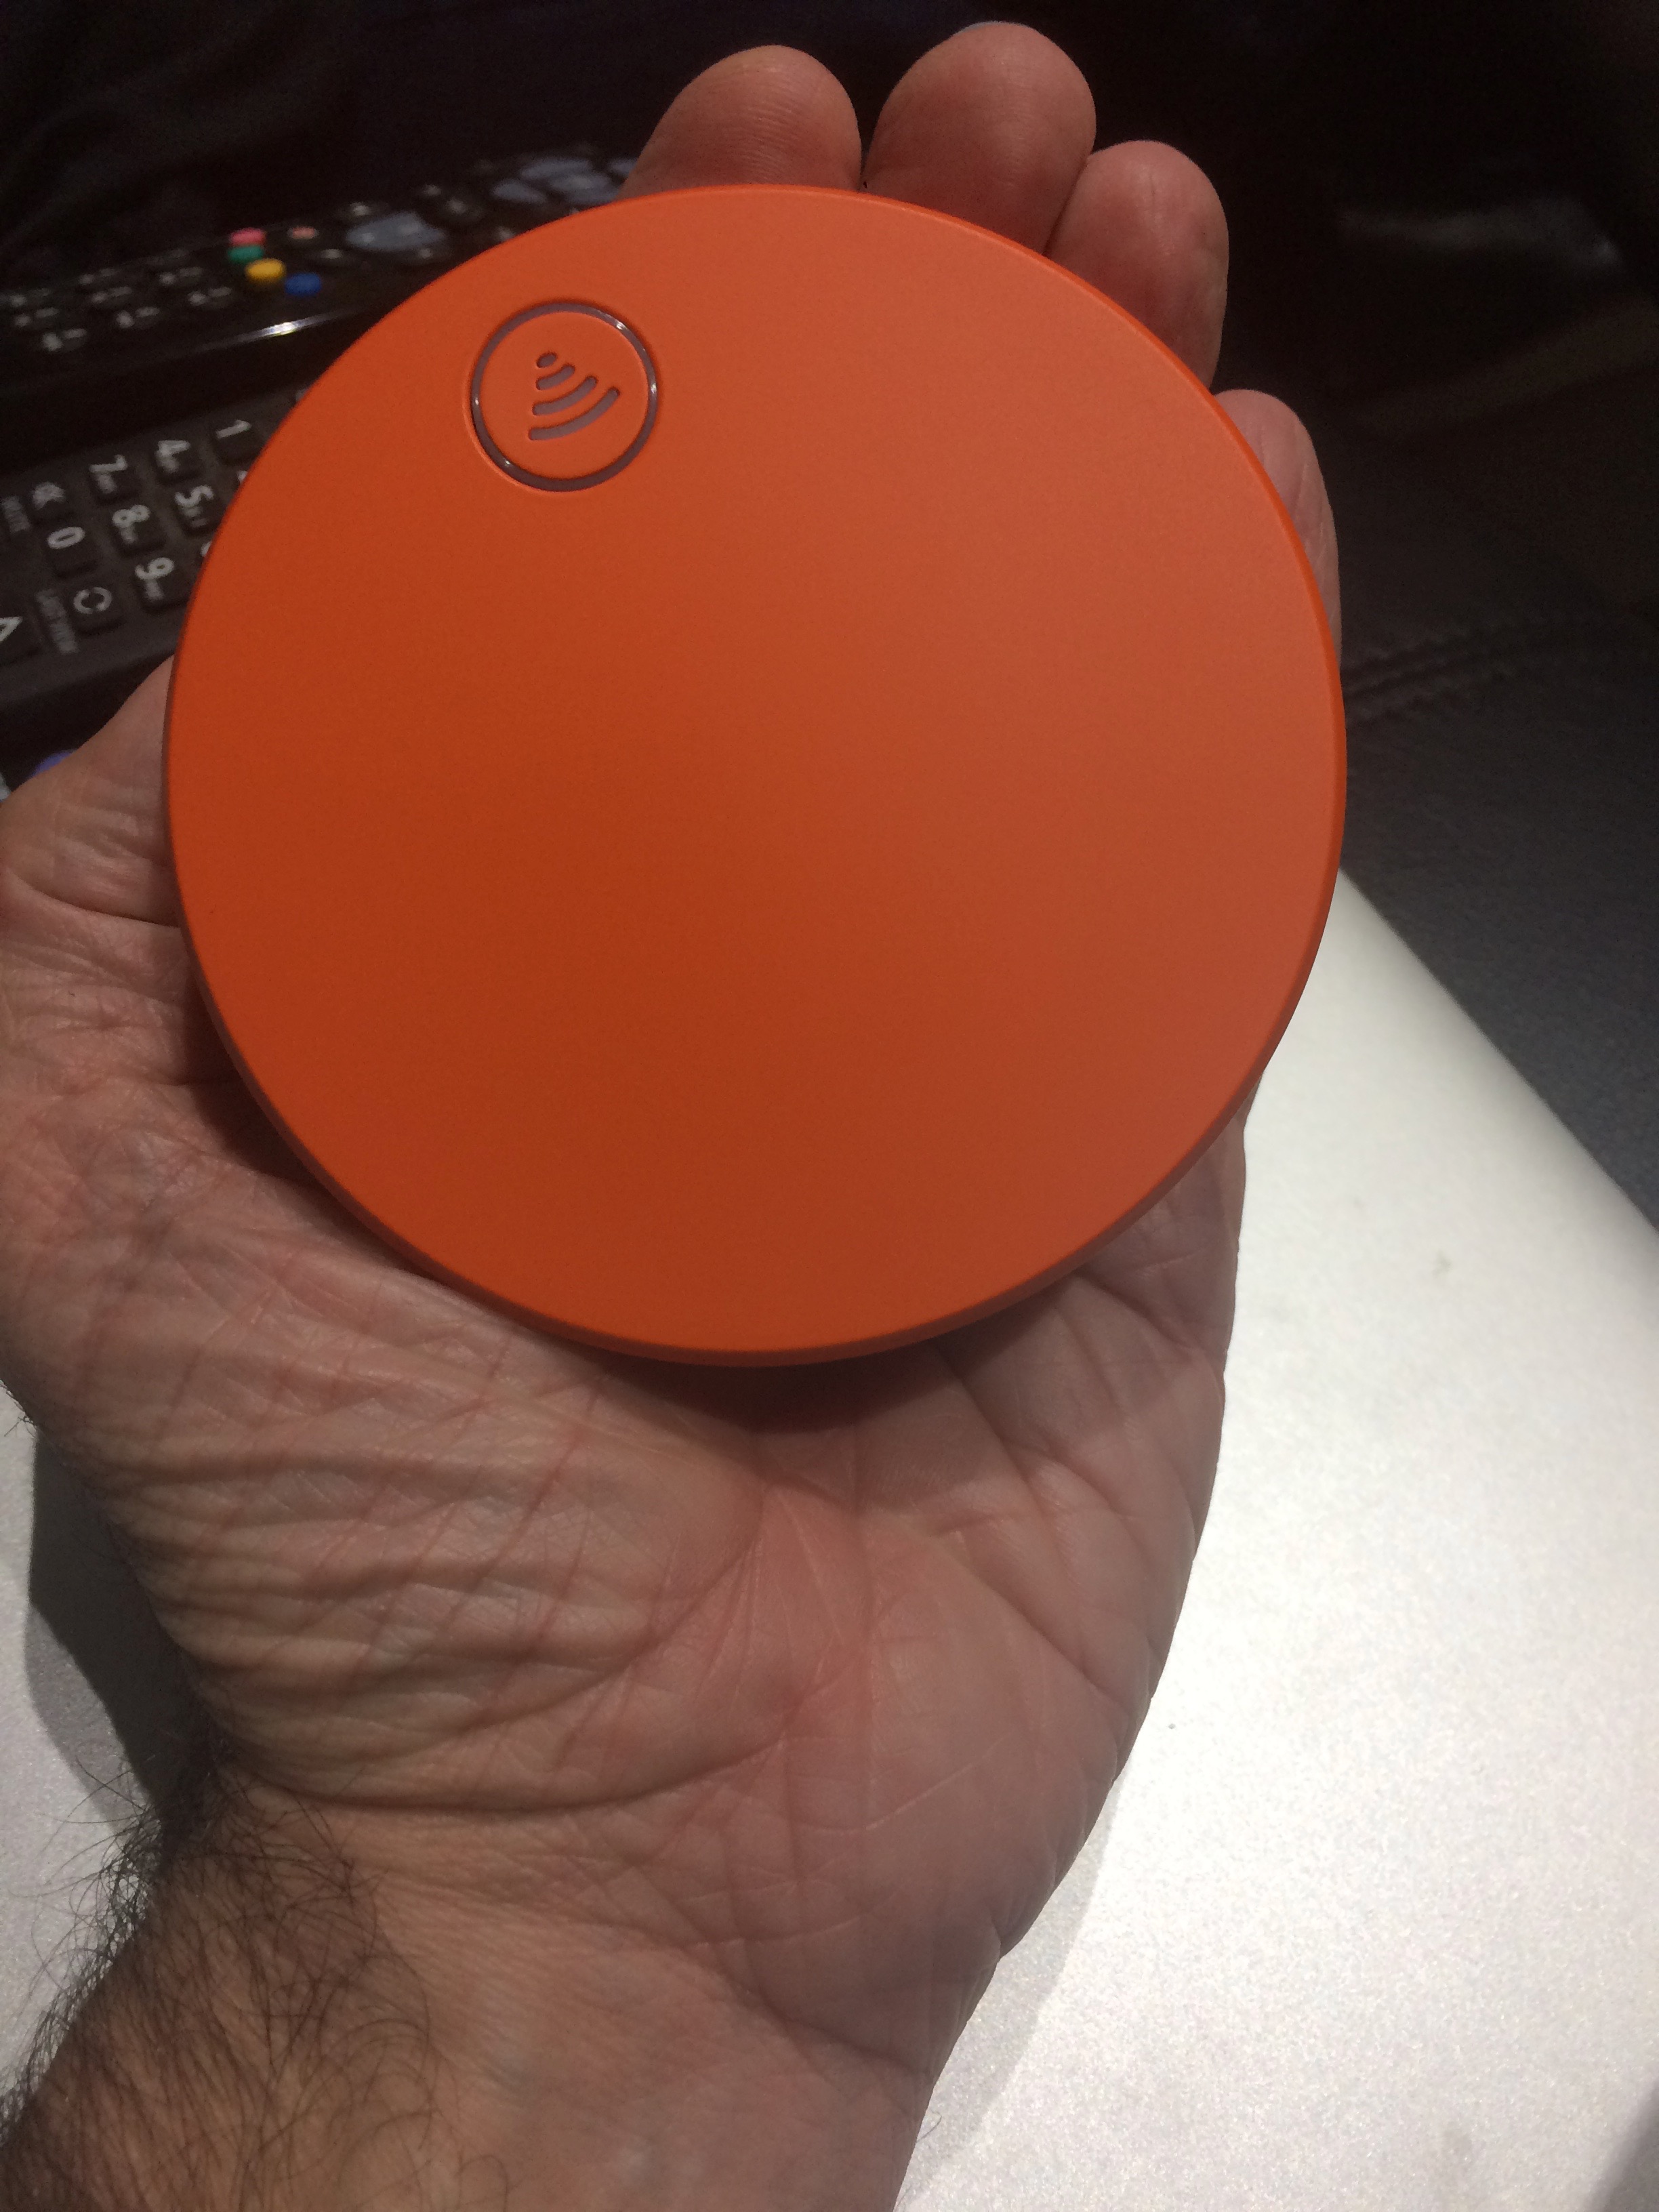 a hand holding an orange device